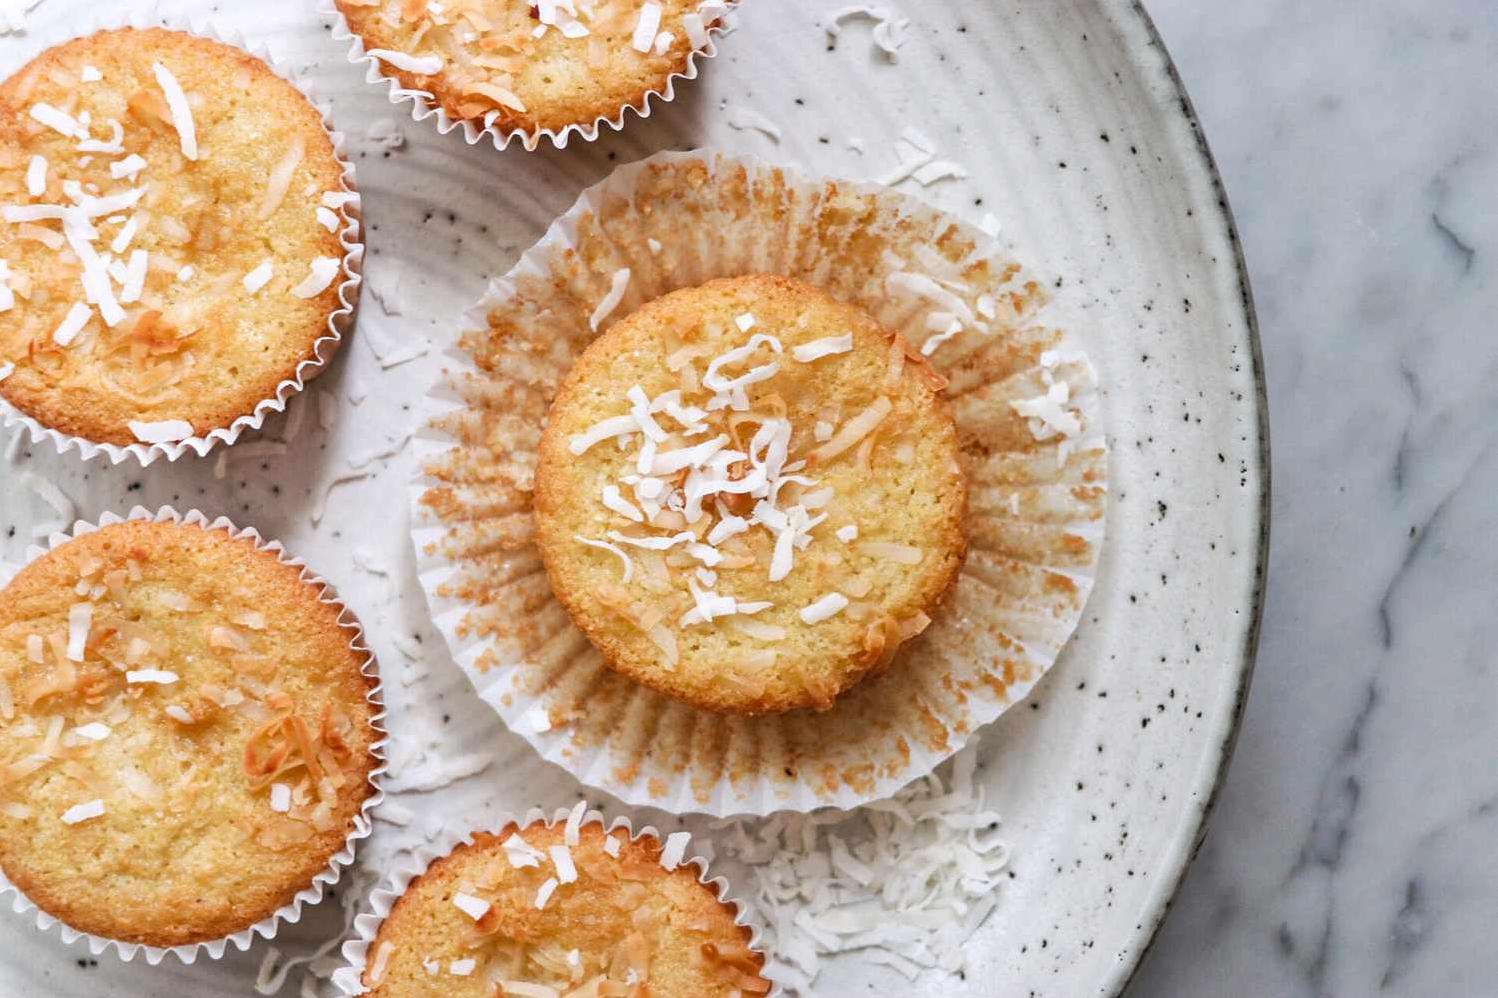  Dairy-free and gluten-free? No problem, these muffins have got you covered.